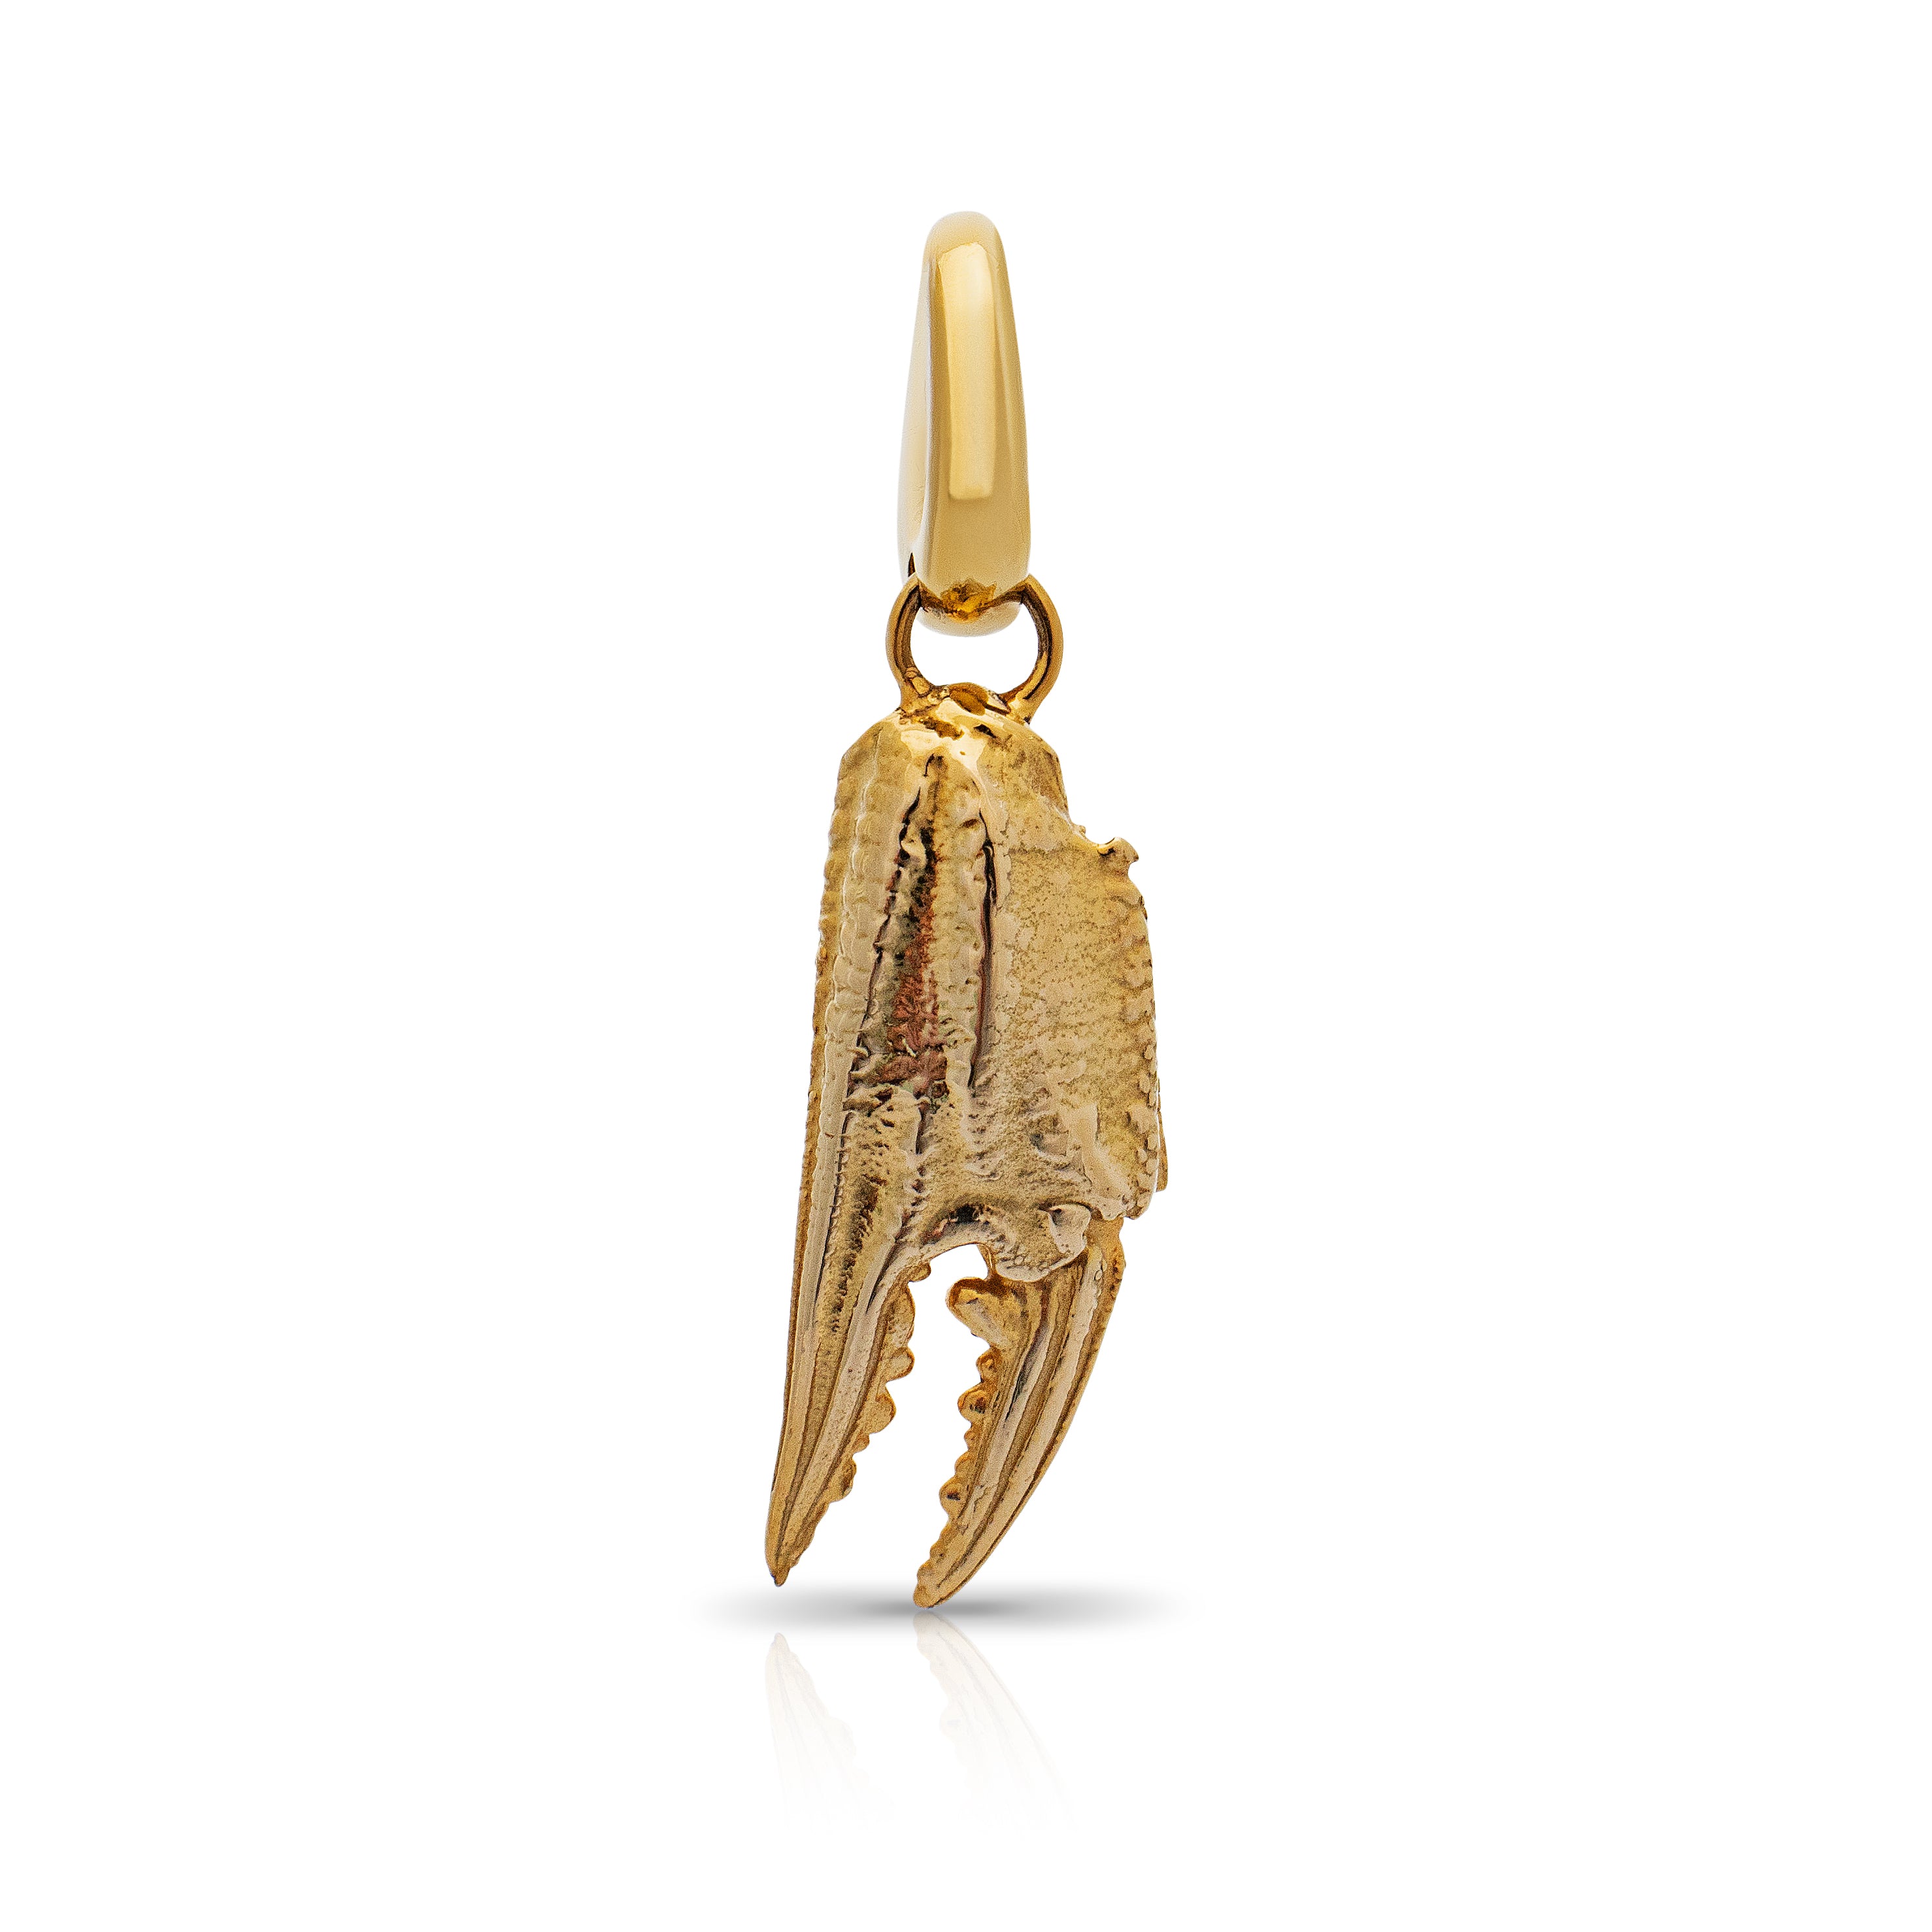 Cromer claw pendant. Gold crab claw. Crab jewellery. Serena Ansell Jewellery.